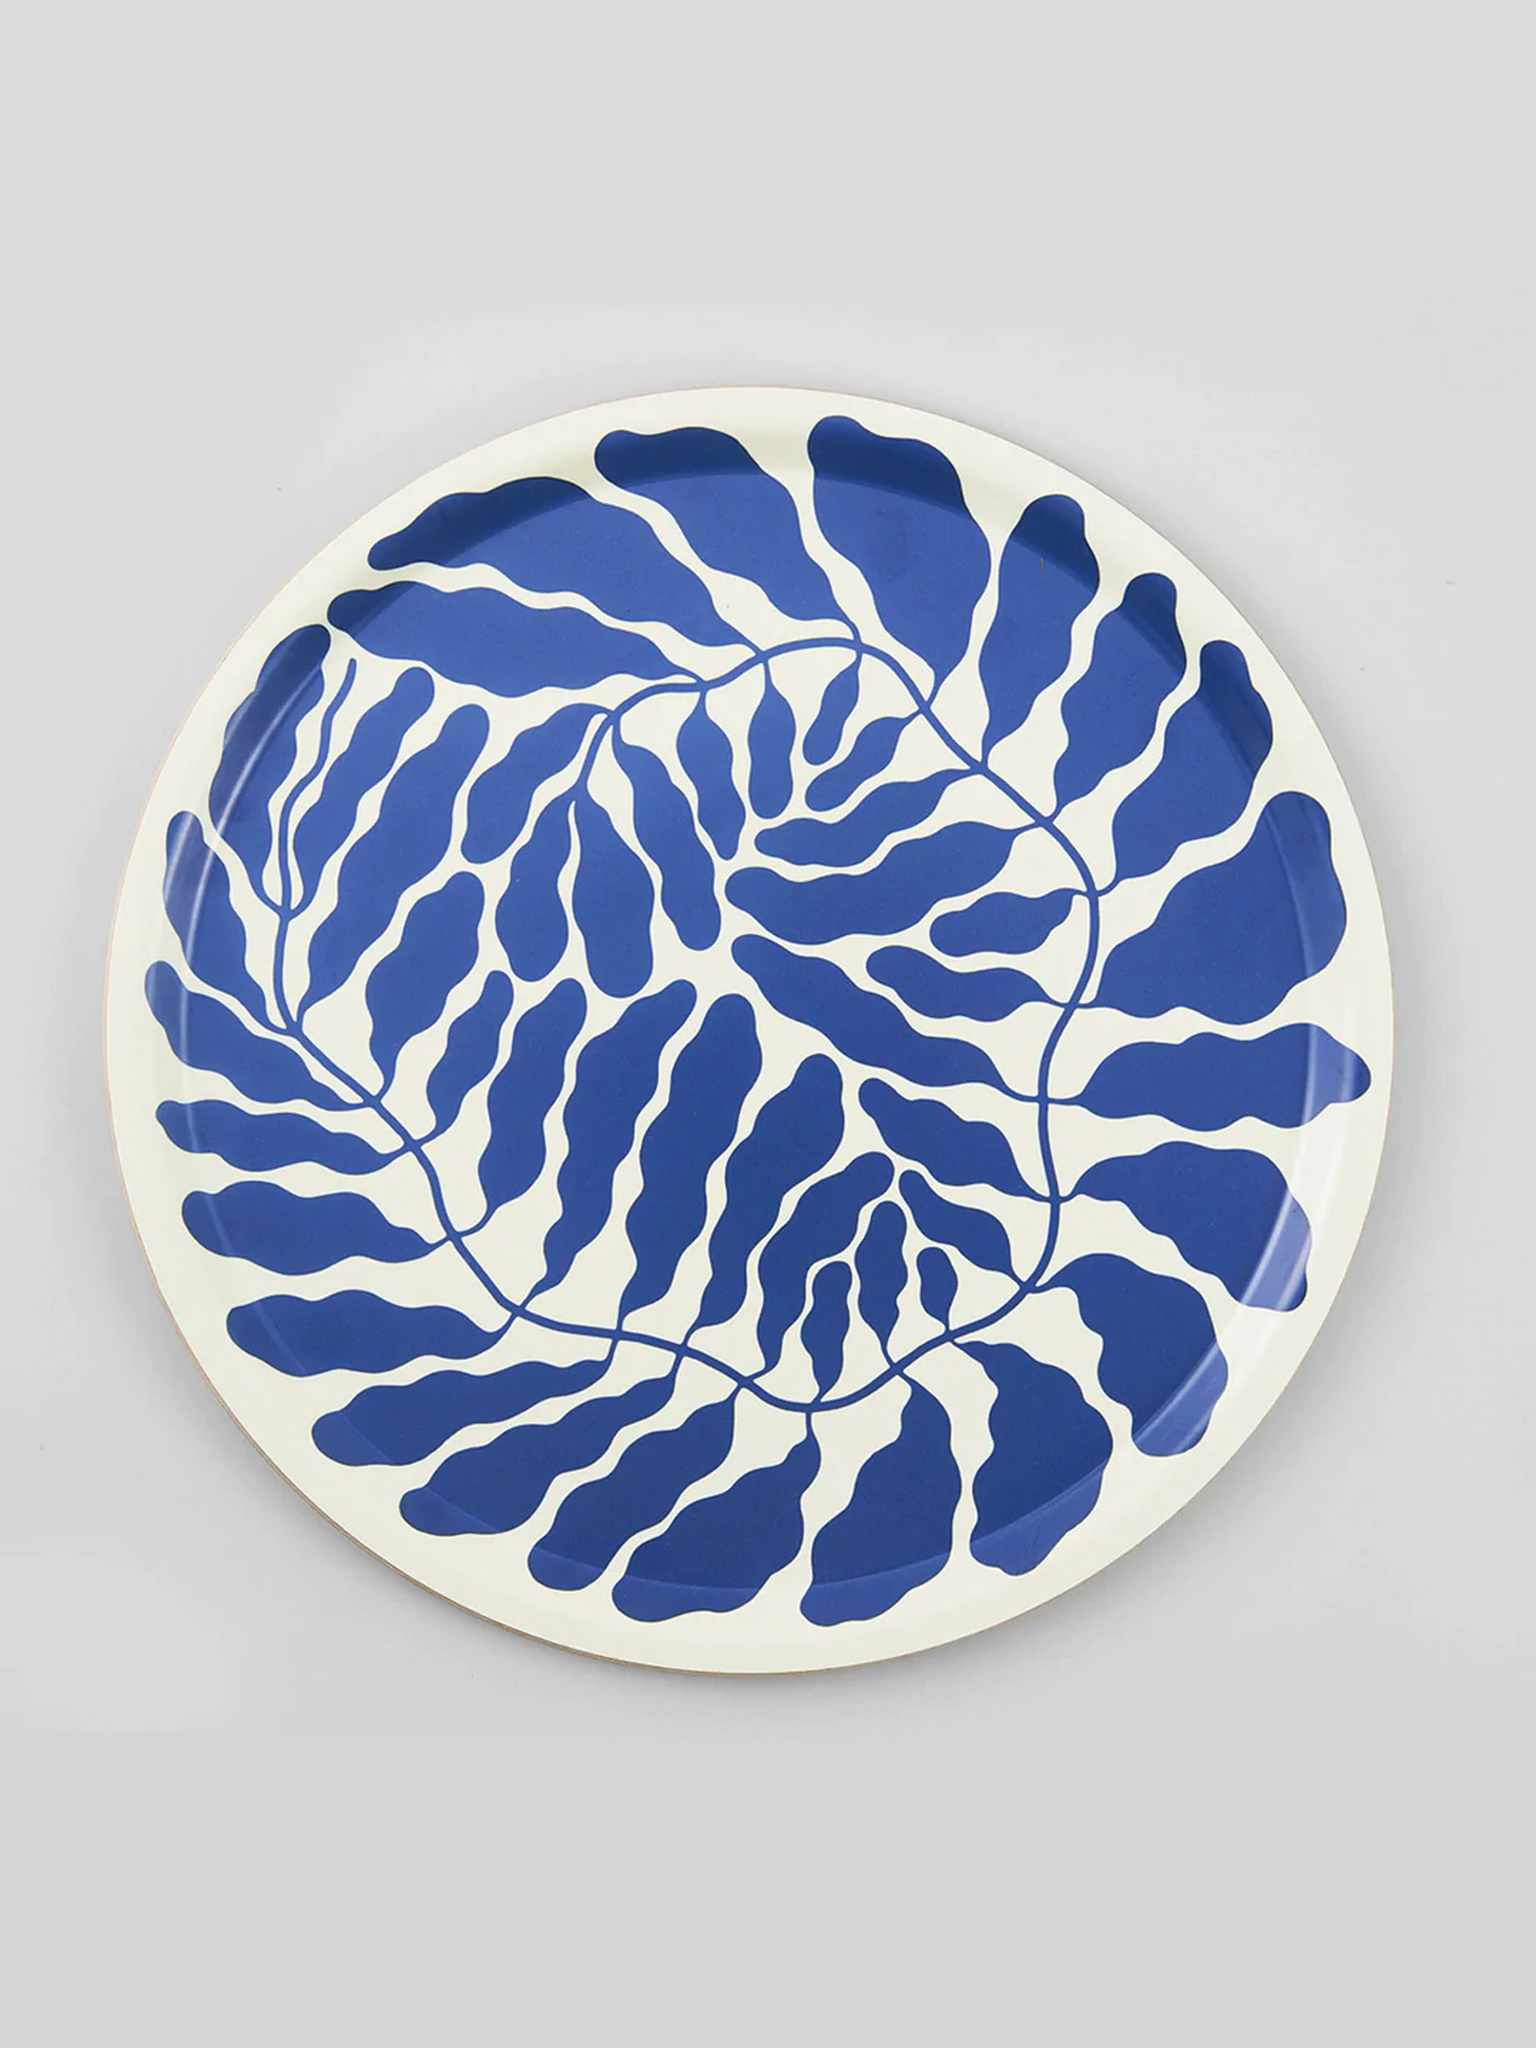 'Blue Leaves' Tray by Linnéa Andersson